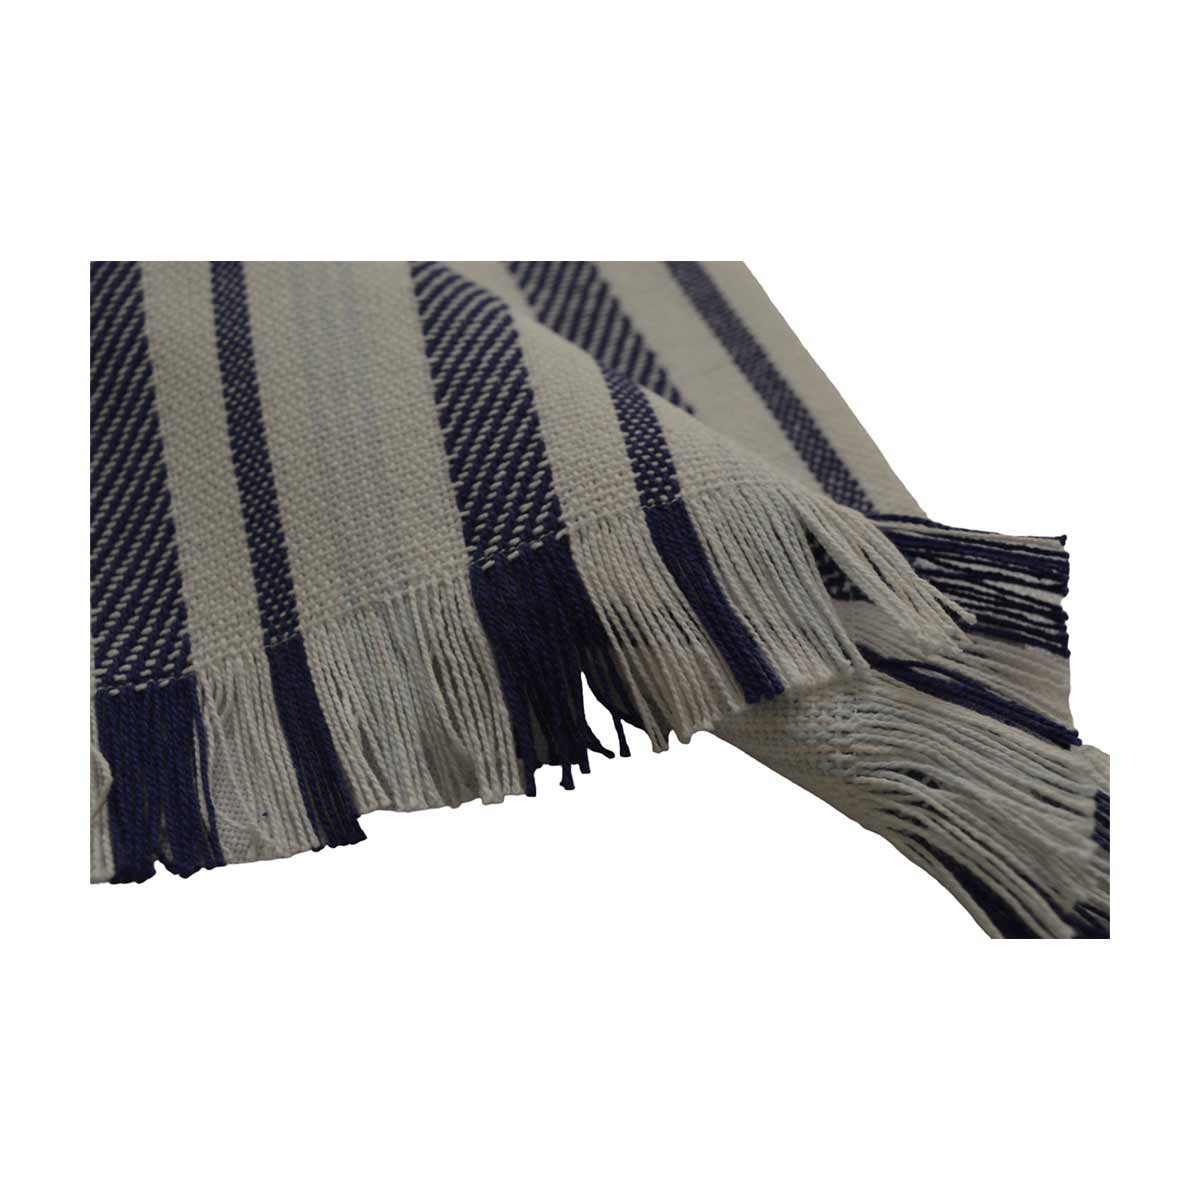 Cotton Woven Stripes Placemat with Fringes, 13 in x 70 in